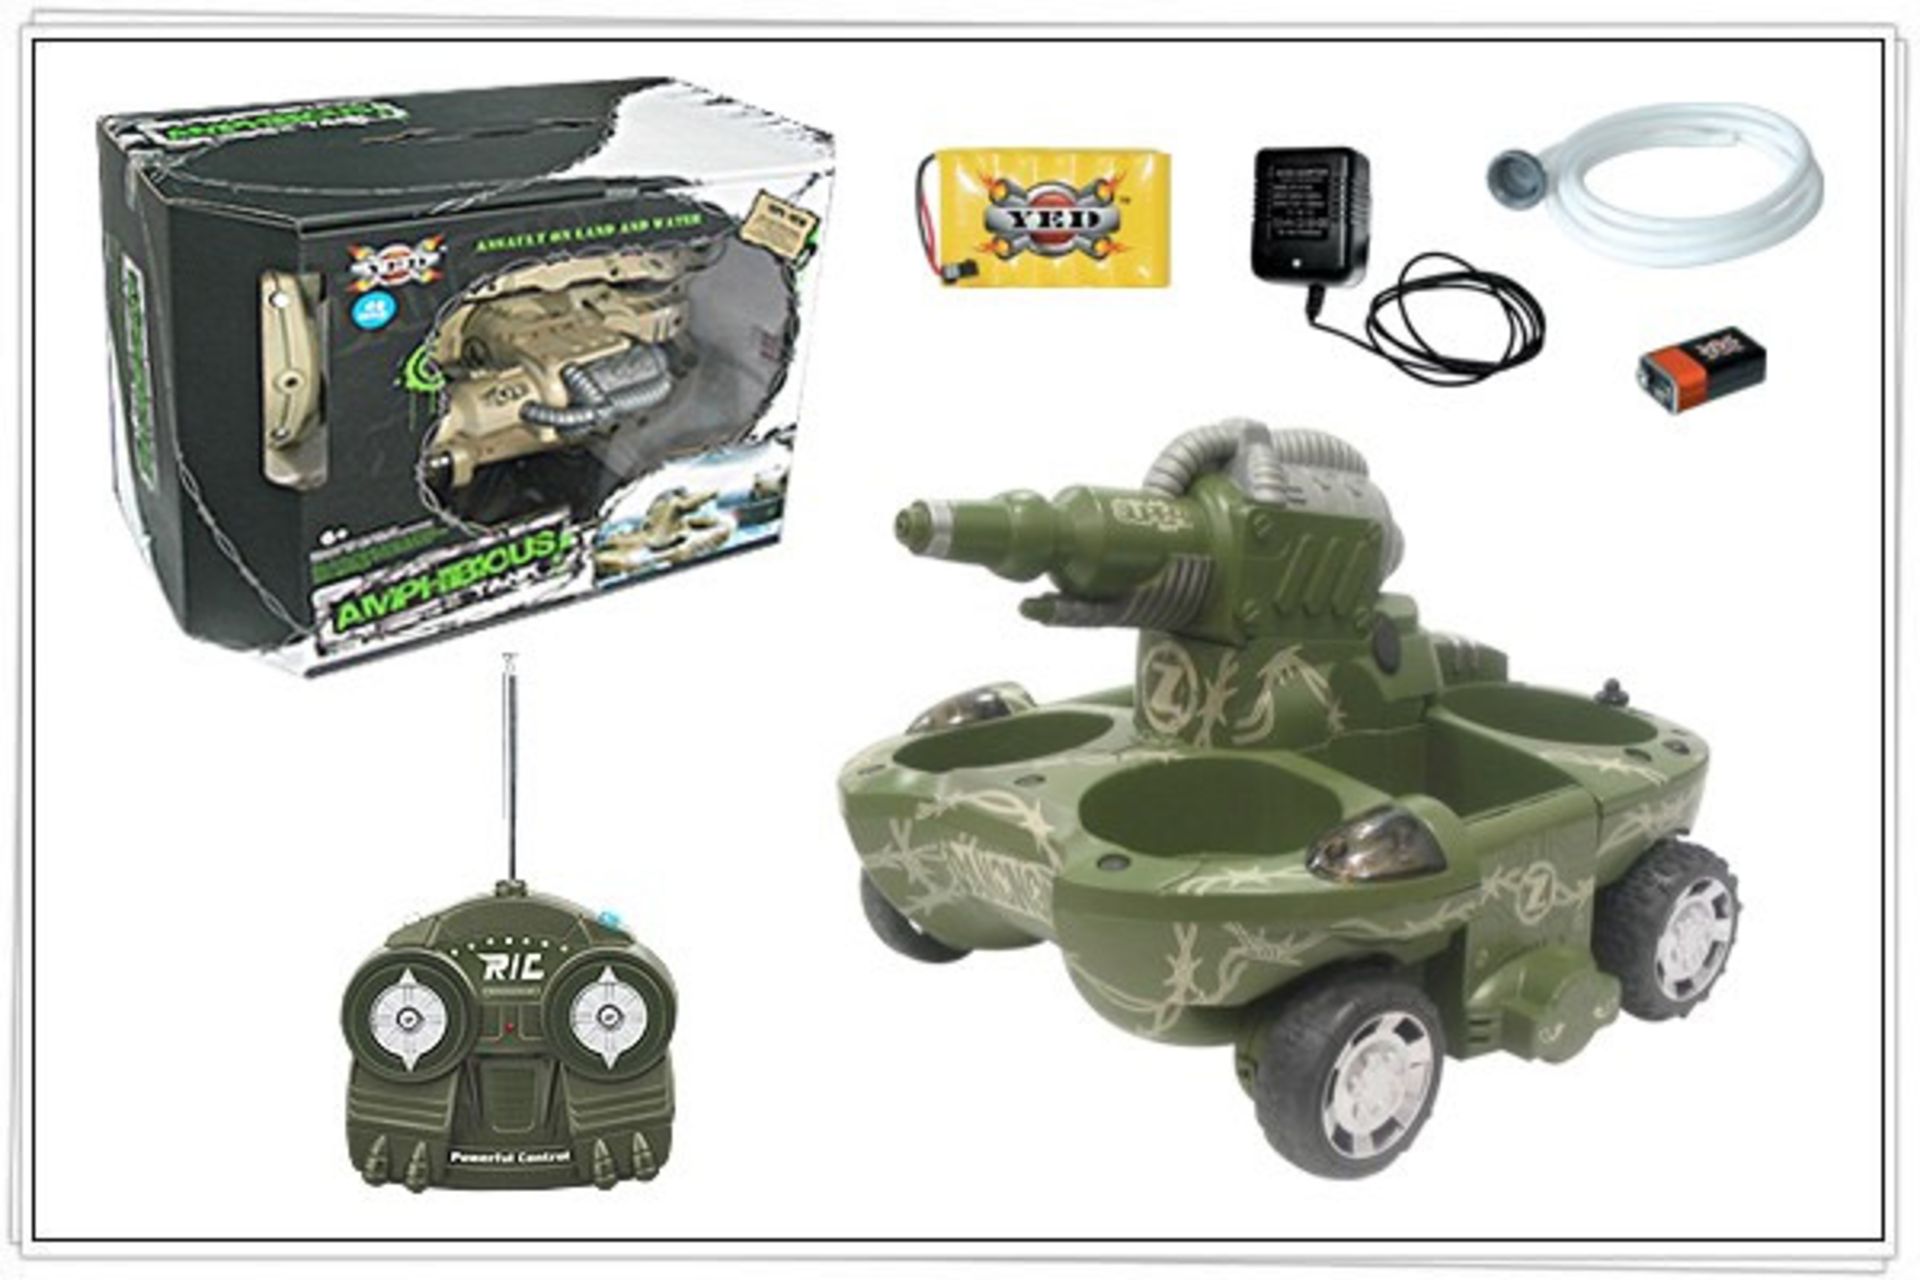 V Brand New R/C Amphibious Super Tank With Water Firing Cannon Works On Land & Water RRP74.99